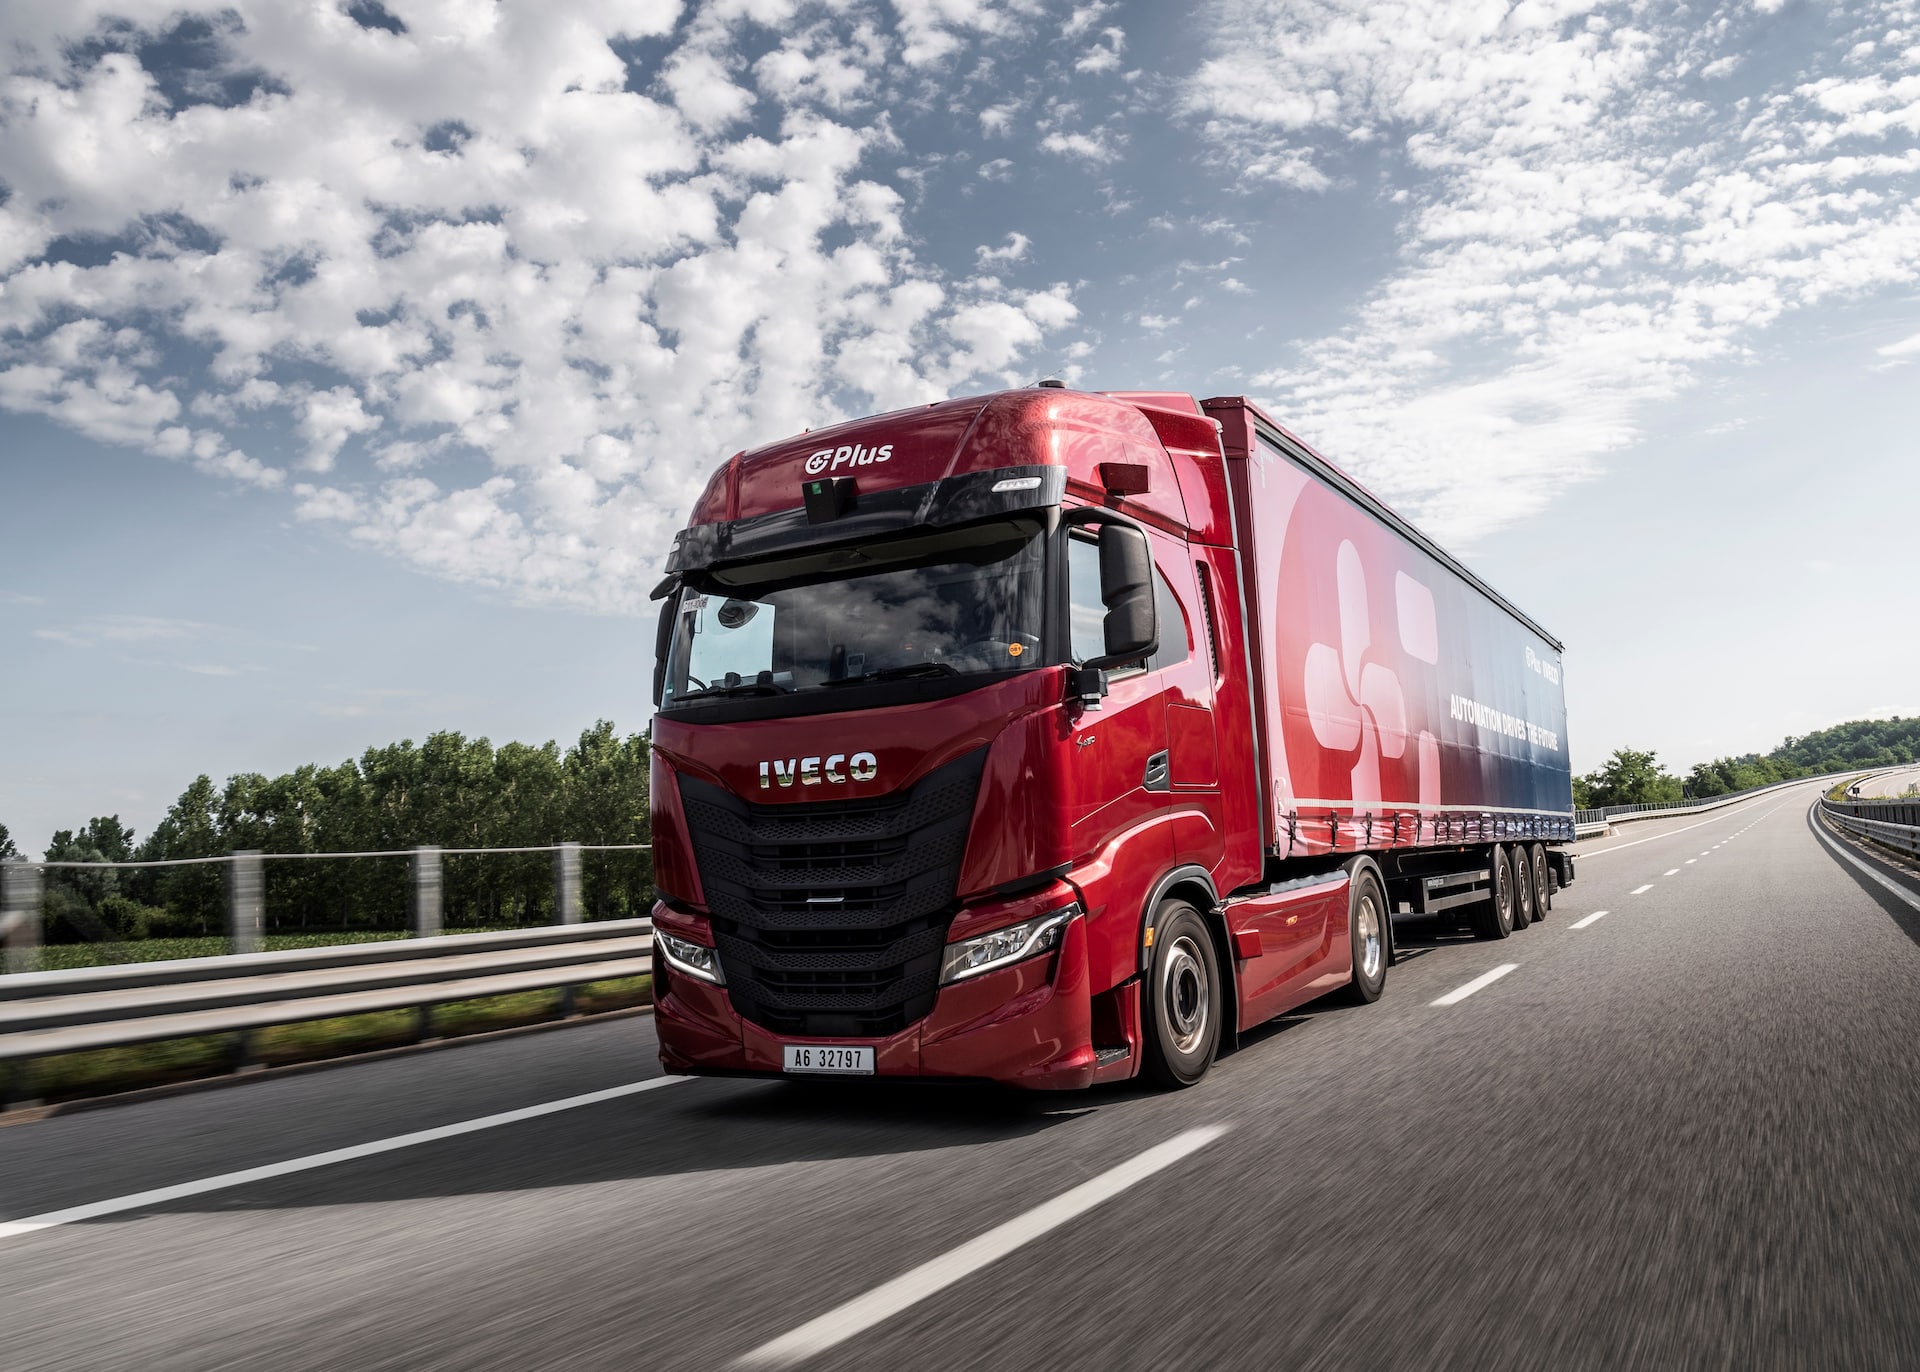 IVECO and Plus Begin Public Road Testing of Next-Generation Highly Automated Trucks in Germany